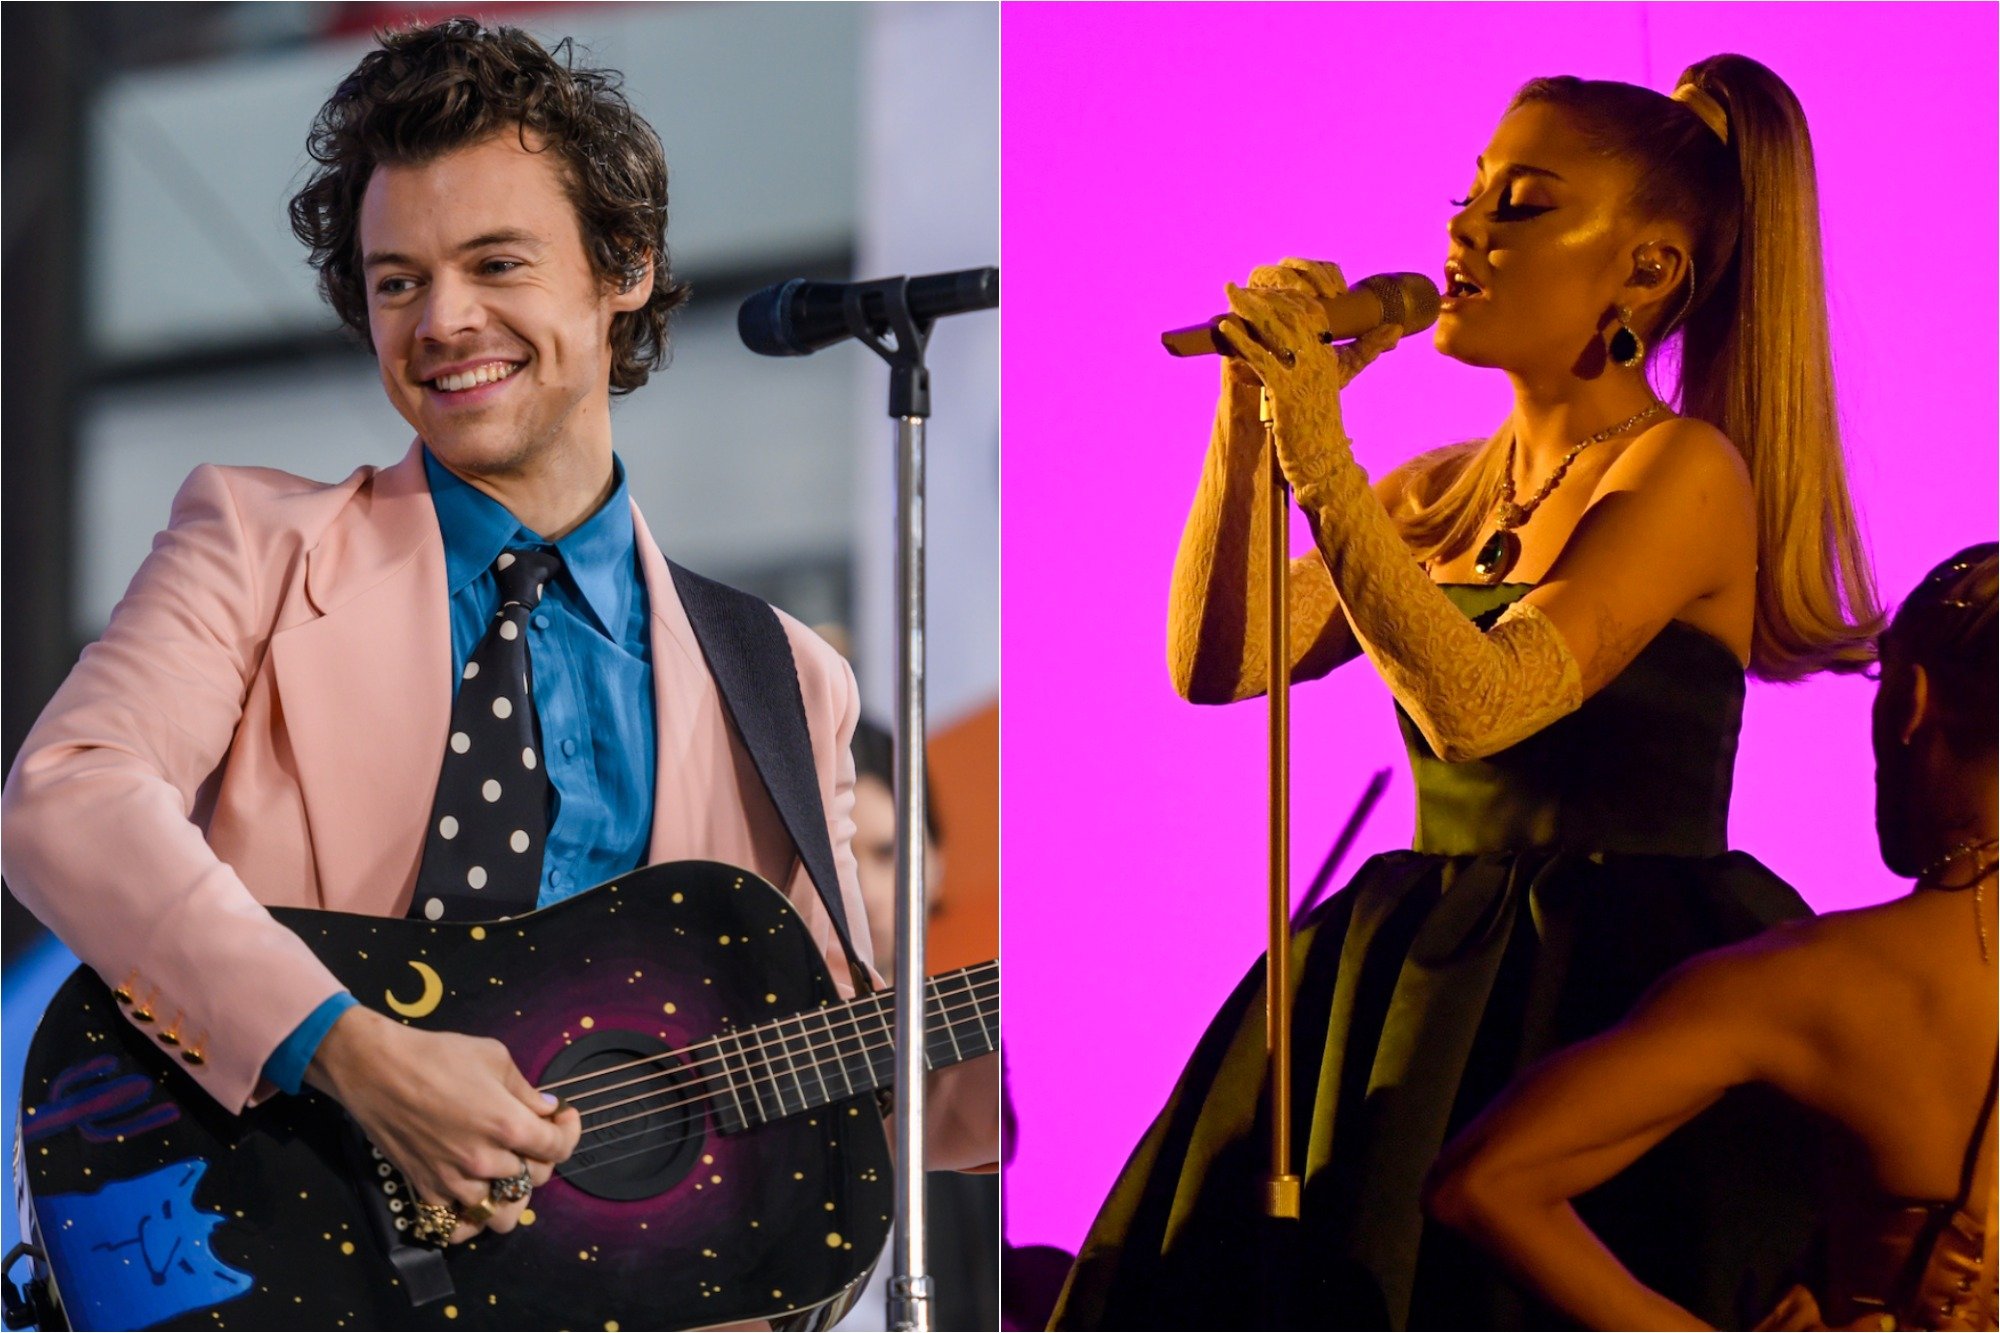 (L) Harry Styles on Feb. 26, 2020 on the TODAY Show / (R) Ariana Grande performs onstage during the 62nd Annual GRAMMY Awards at Staples Center on Jan. 26, 2020.